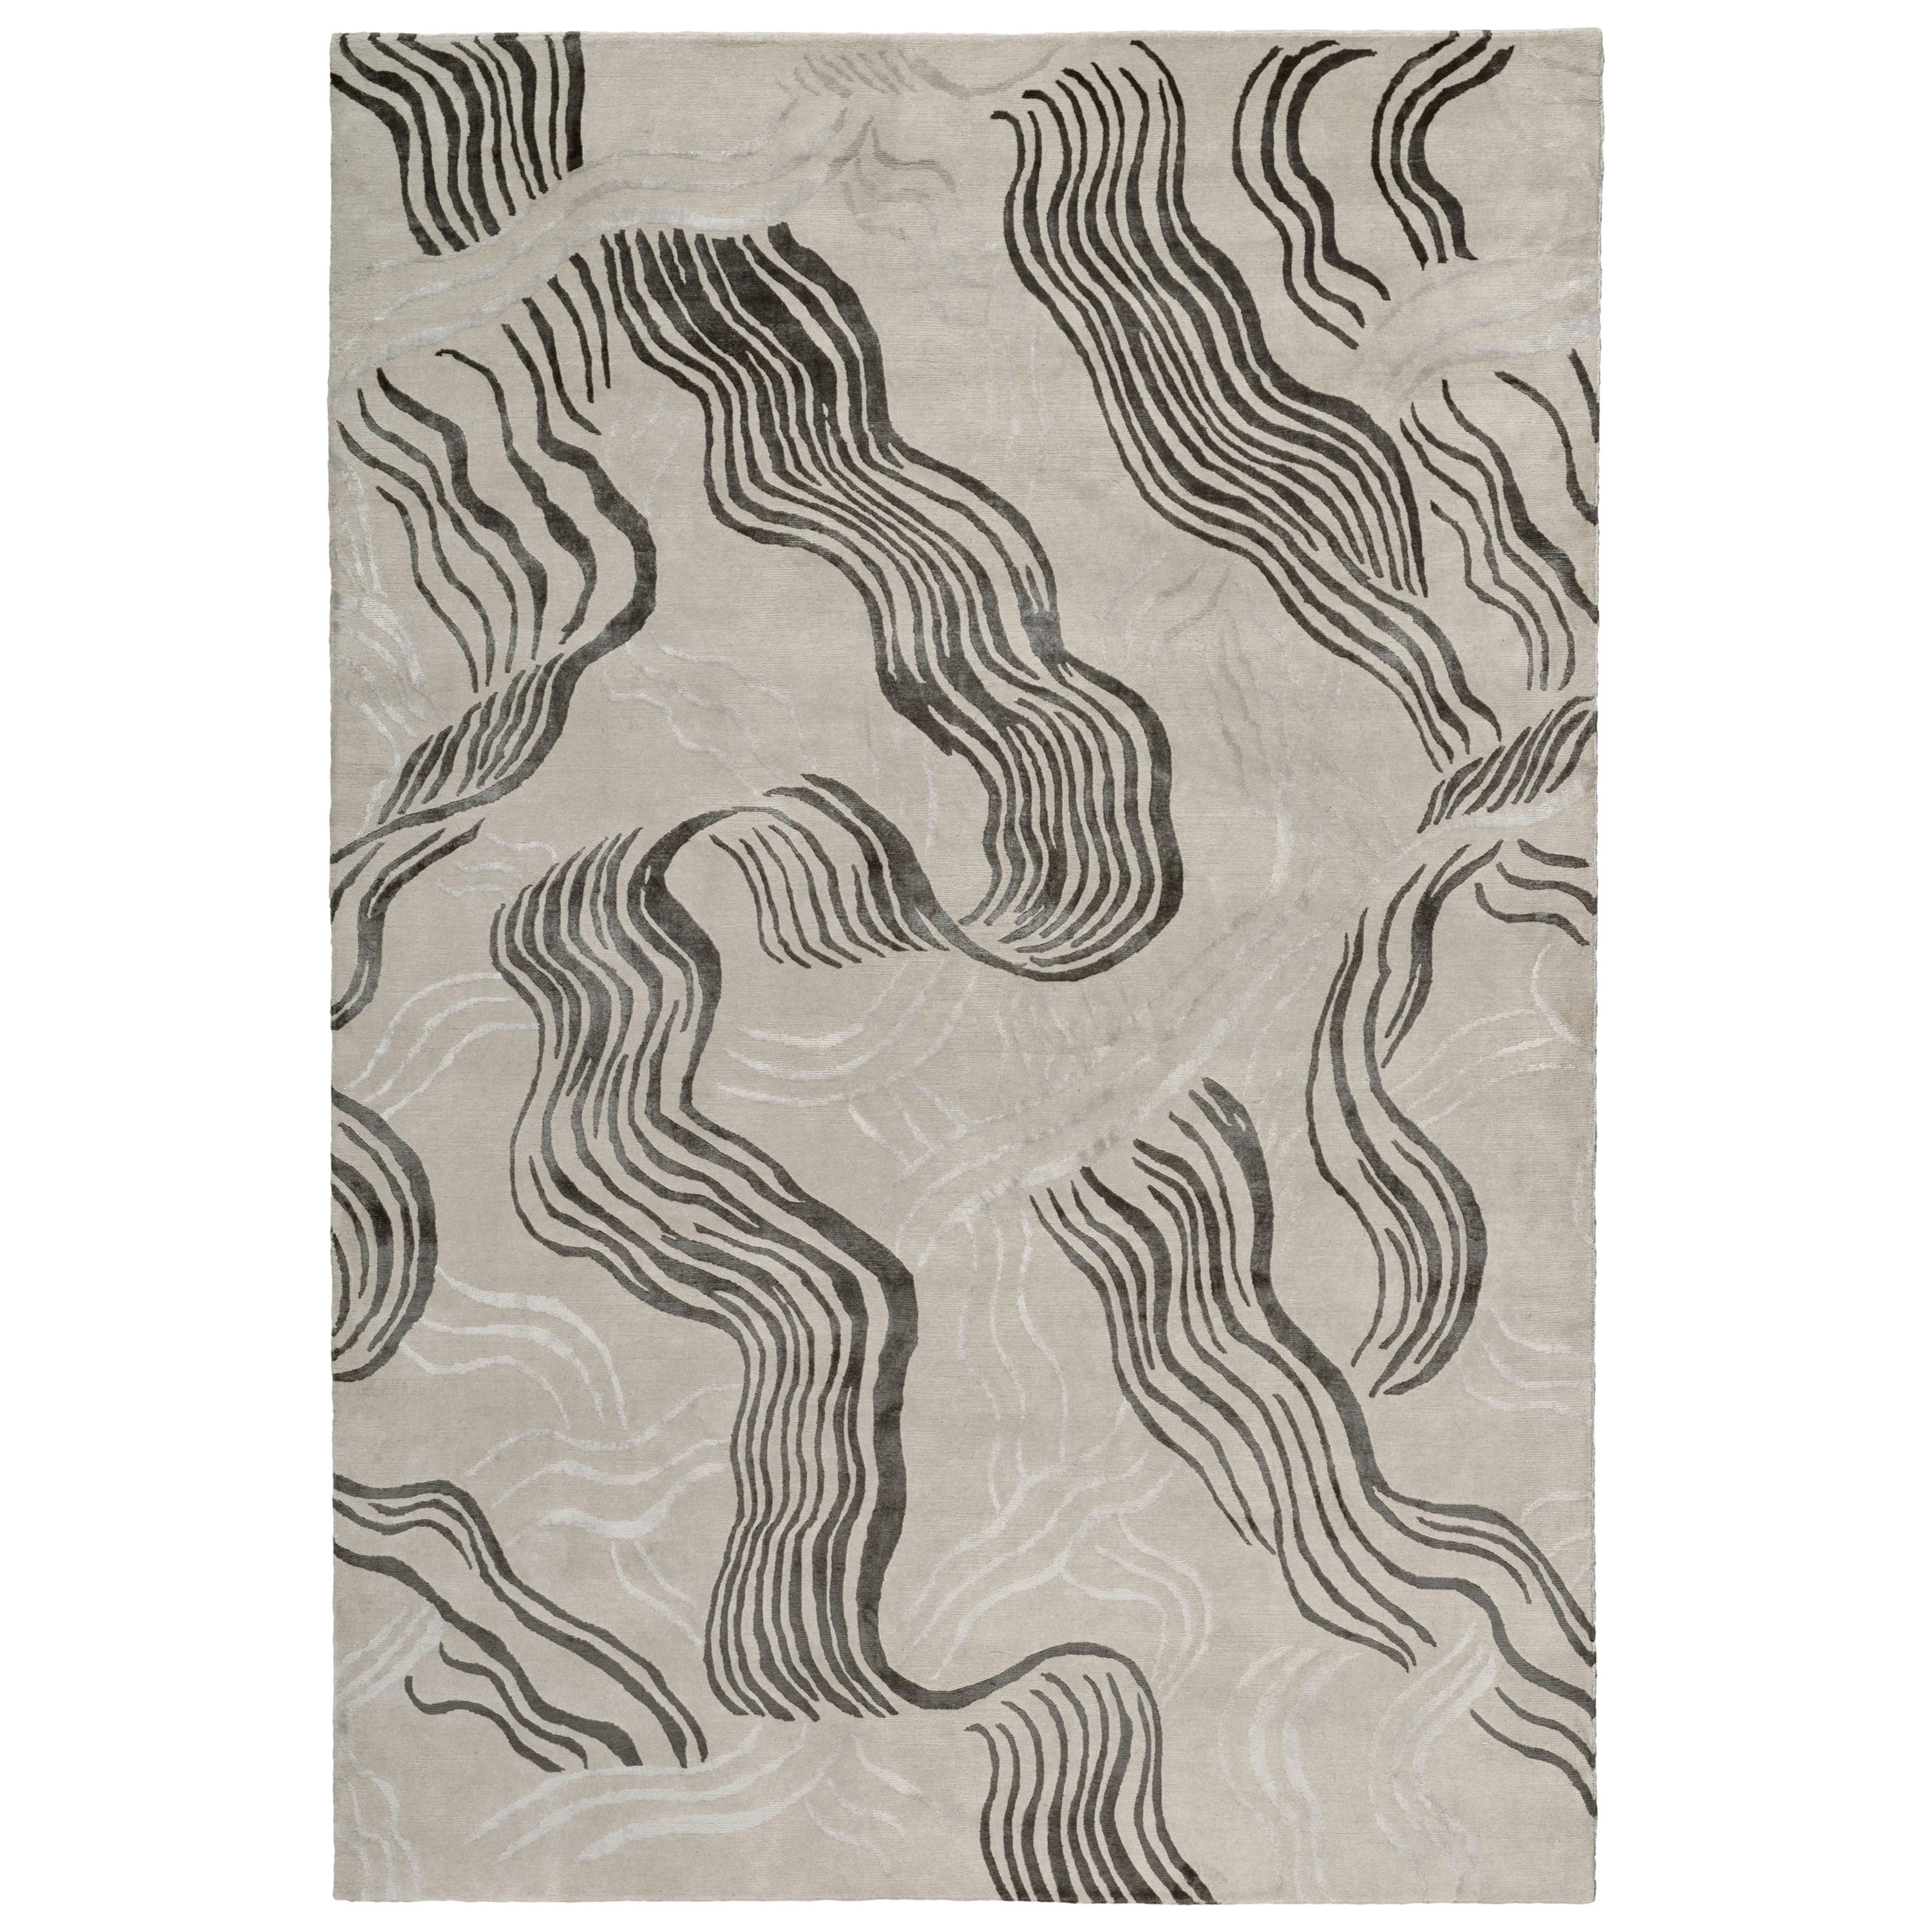 Wake Hand-Knotted 12x9 Rug in Wool and Silk by Kelly Wearstler